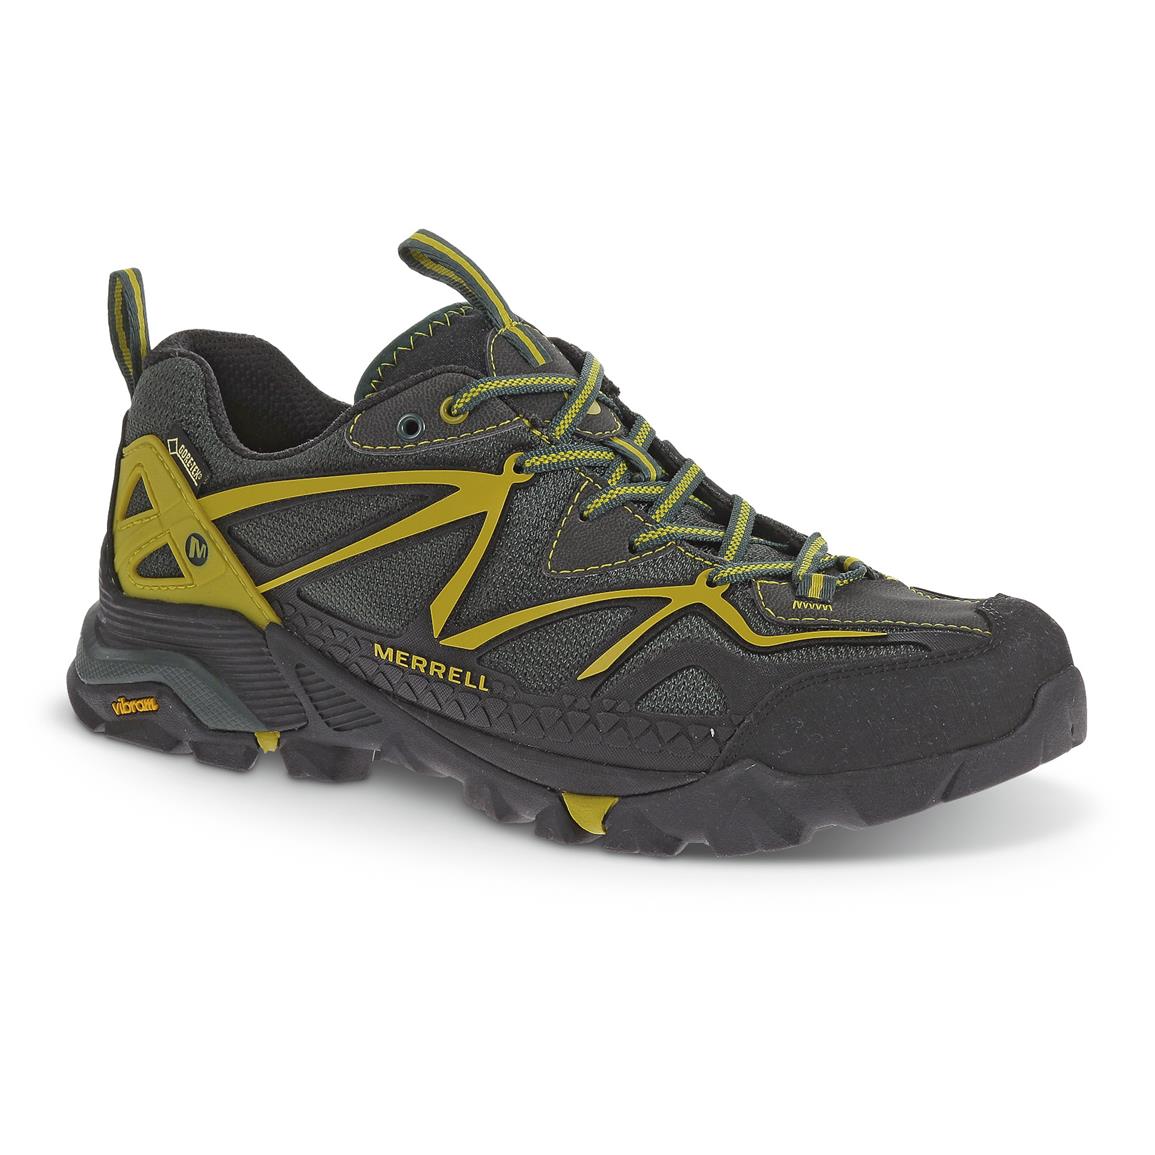 Merrell Men's Capra Sport GORE-TEX Hiking Shoes, Waterproof - 663330, Hiking Boots & Shoes at 